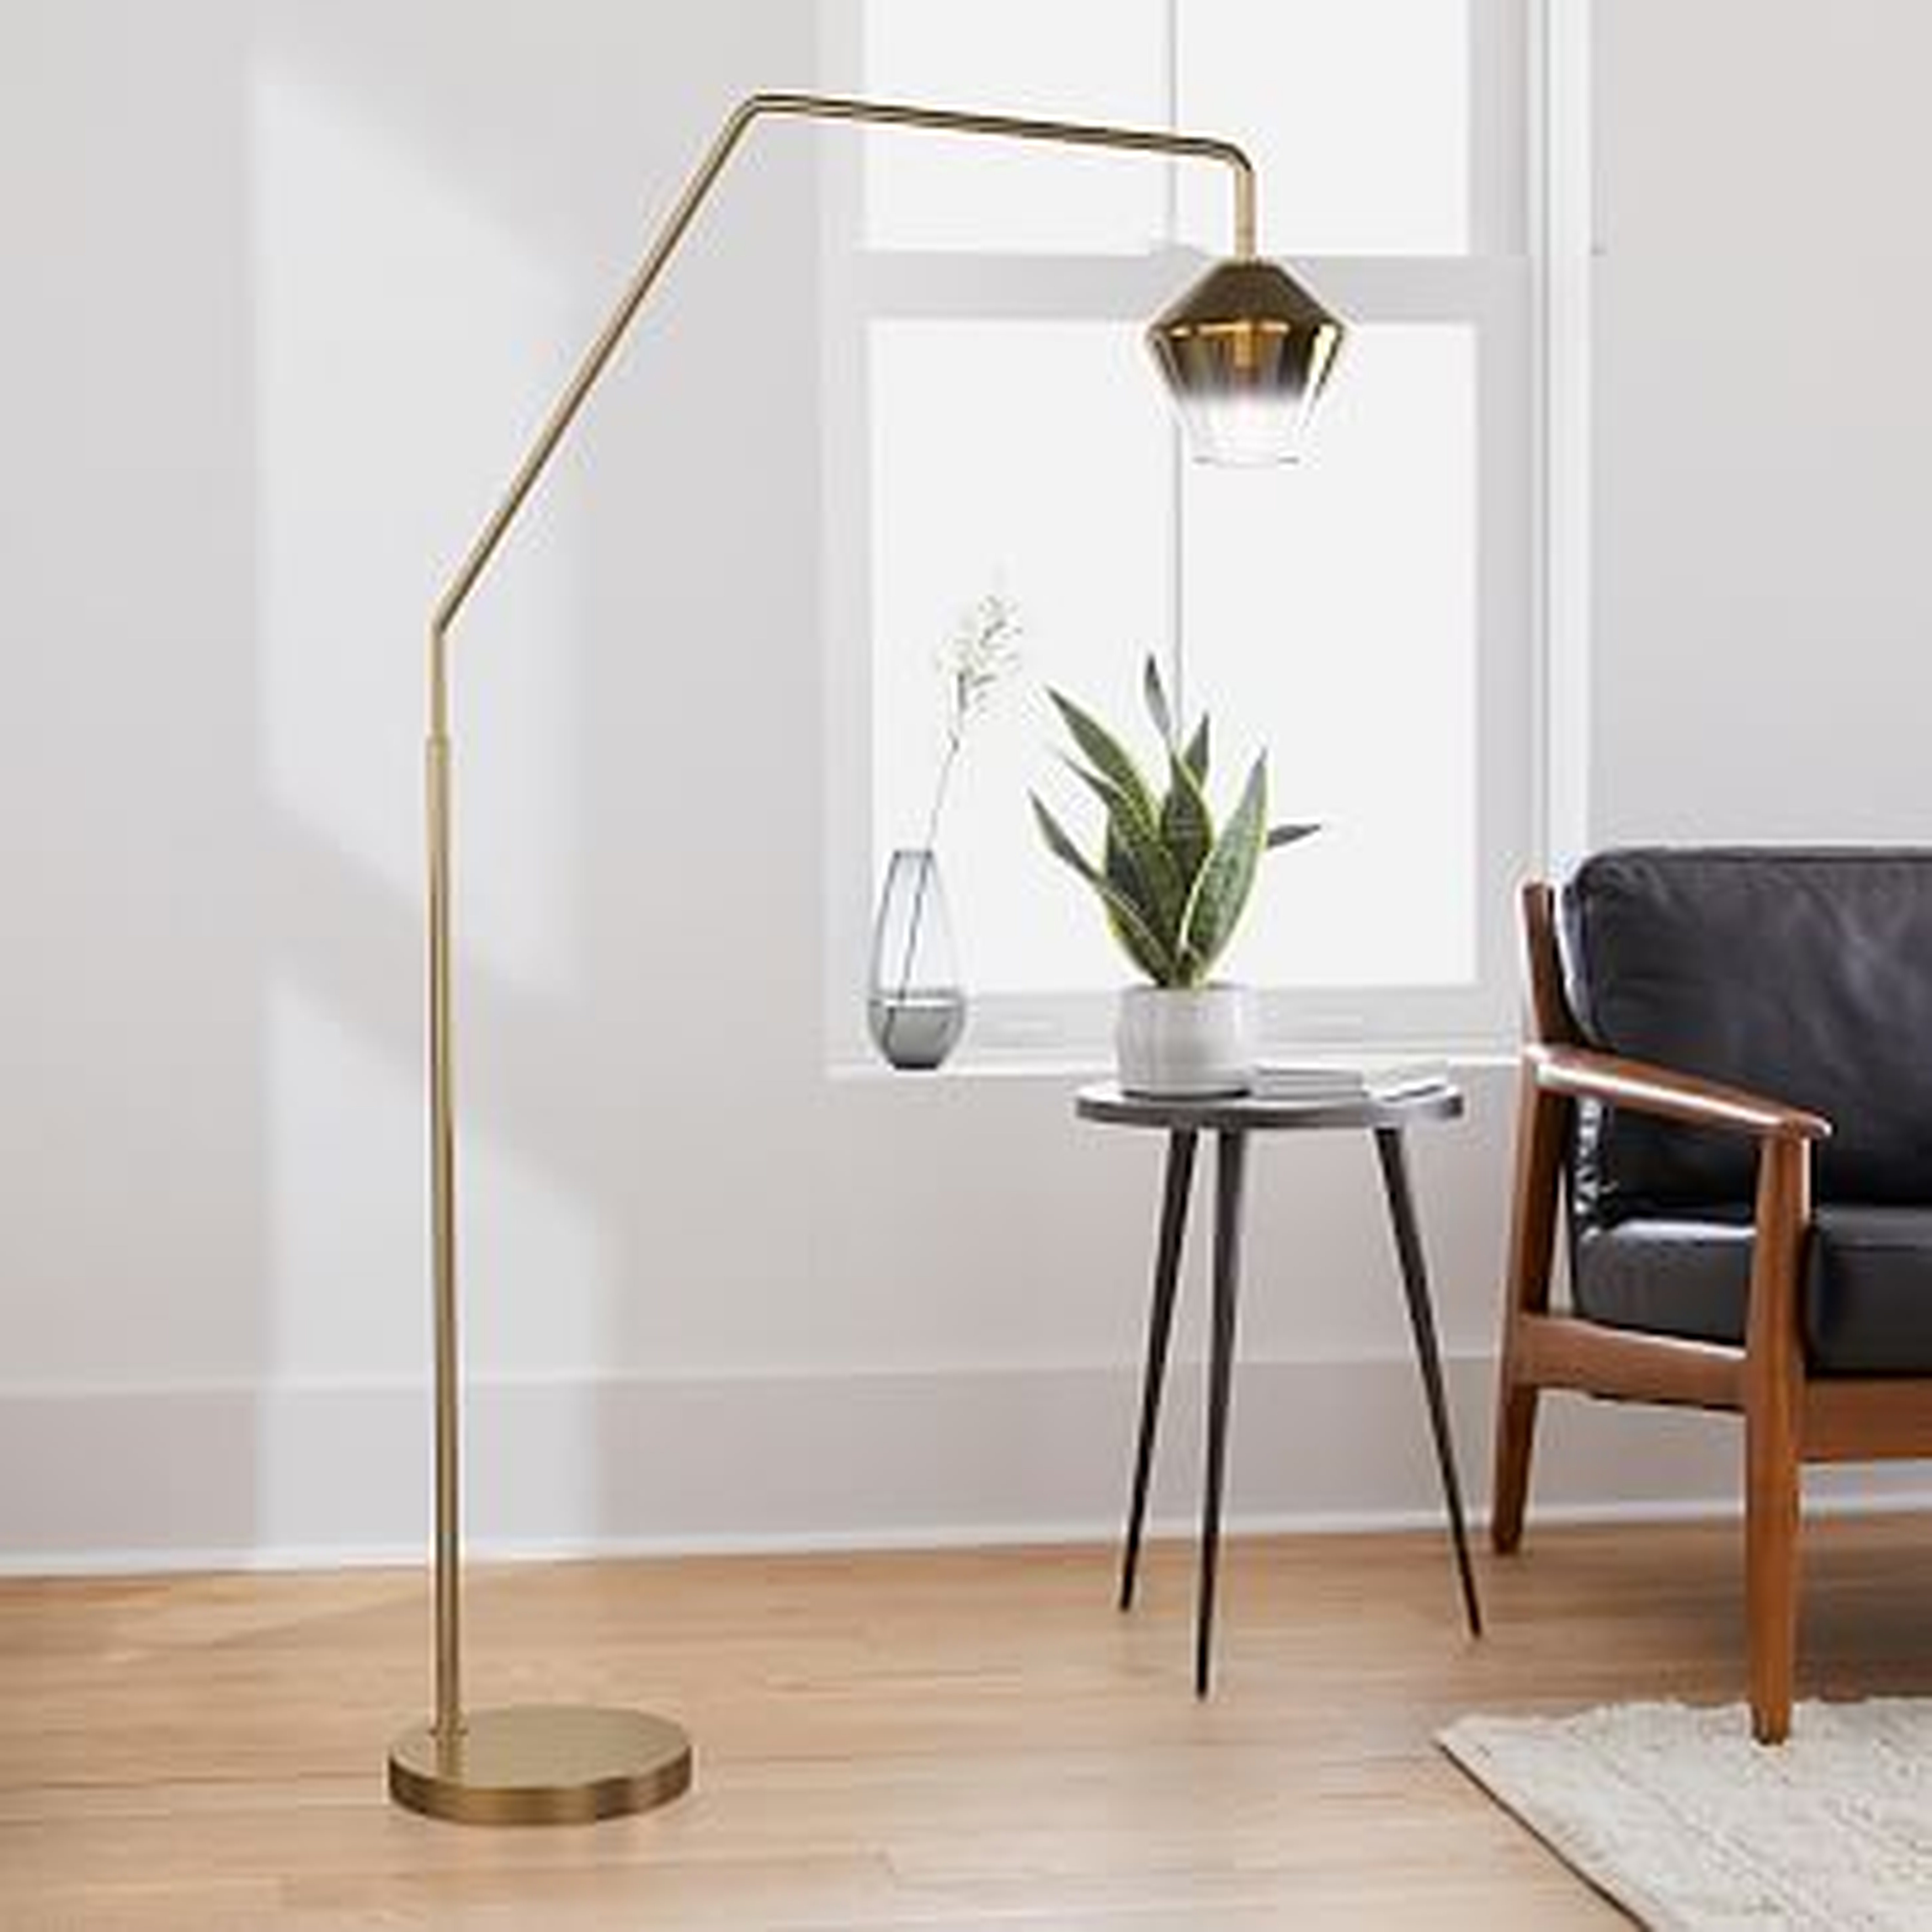 Sculptural Overarching Floor Lamp, Geo Small, Gold Ombre, Antique Brass, 7.5" - West Elm